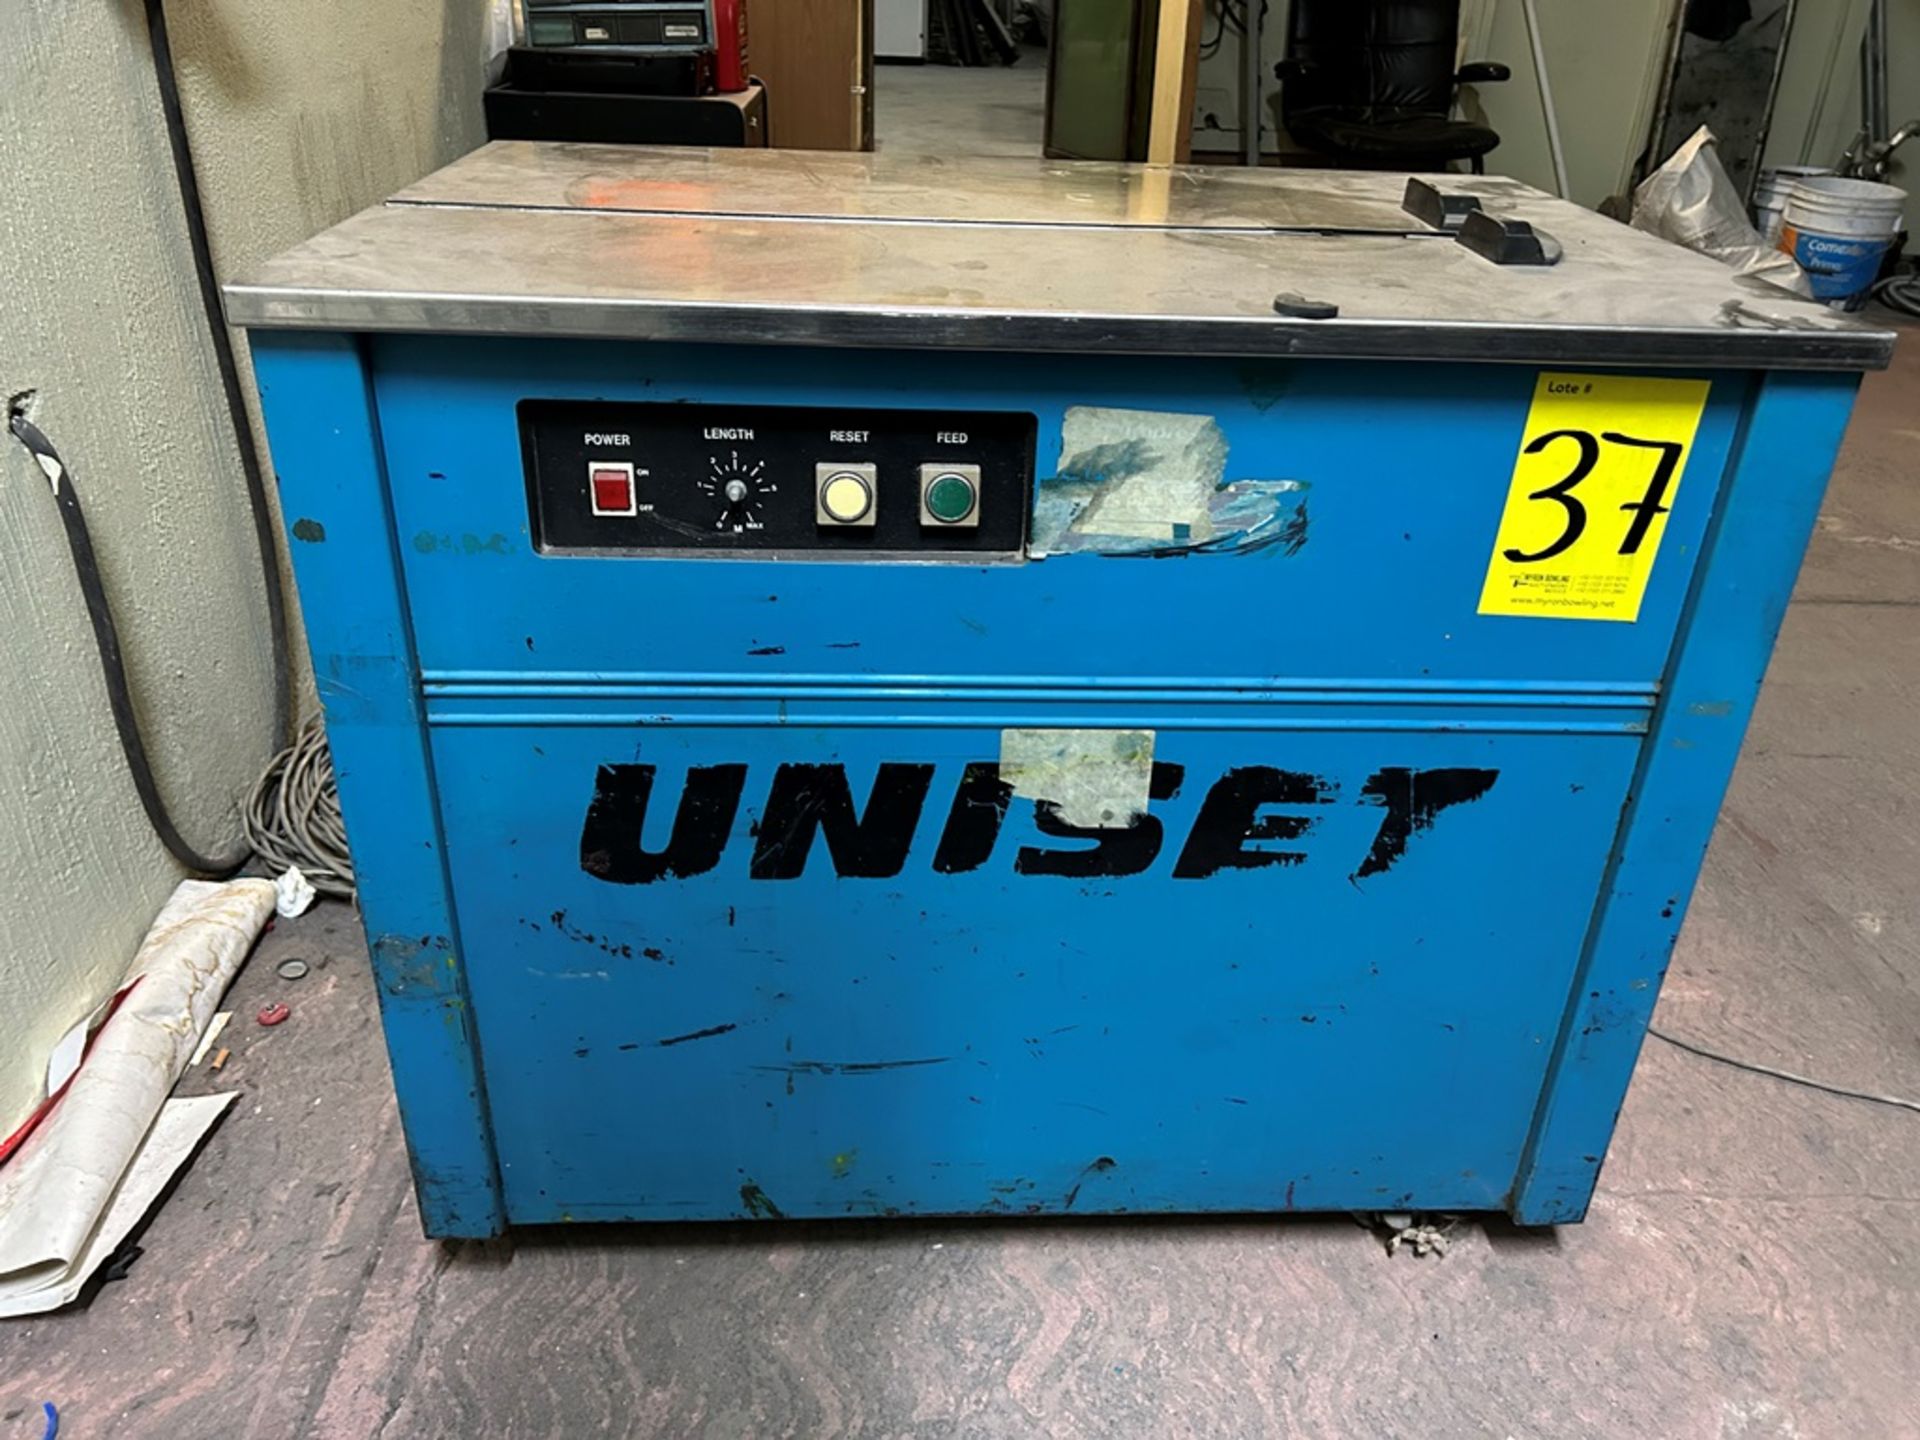 UNISET Strapping machine (plastic strap) , Model ND, Serial No ND, Year ND, 110V, Max. capacity 50 - Image 4 of 6